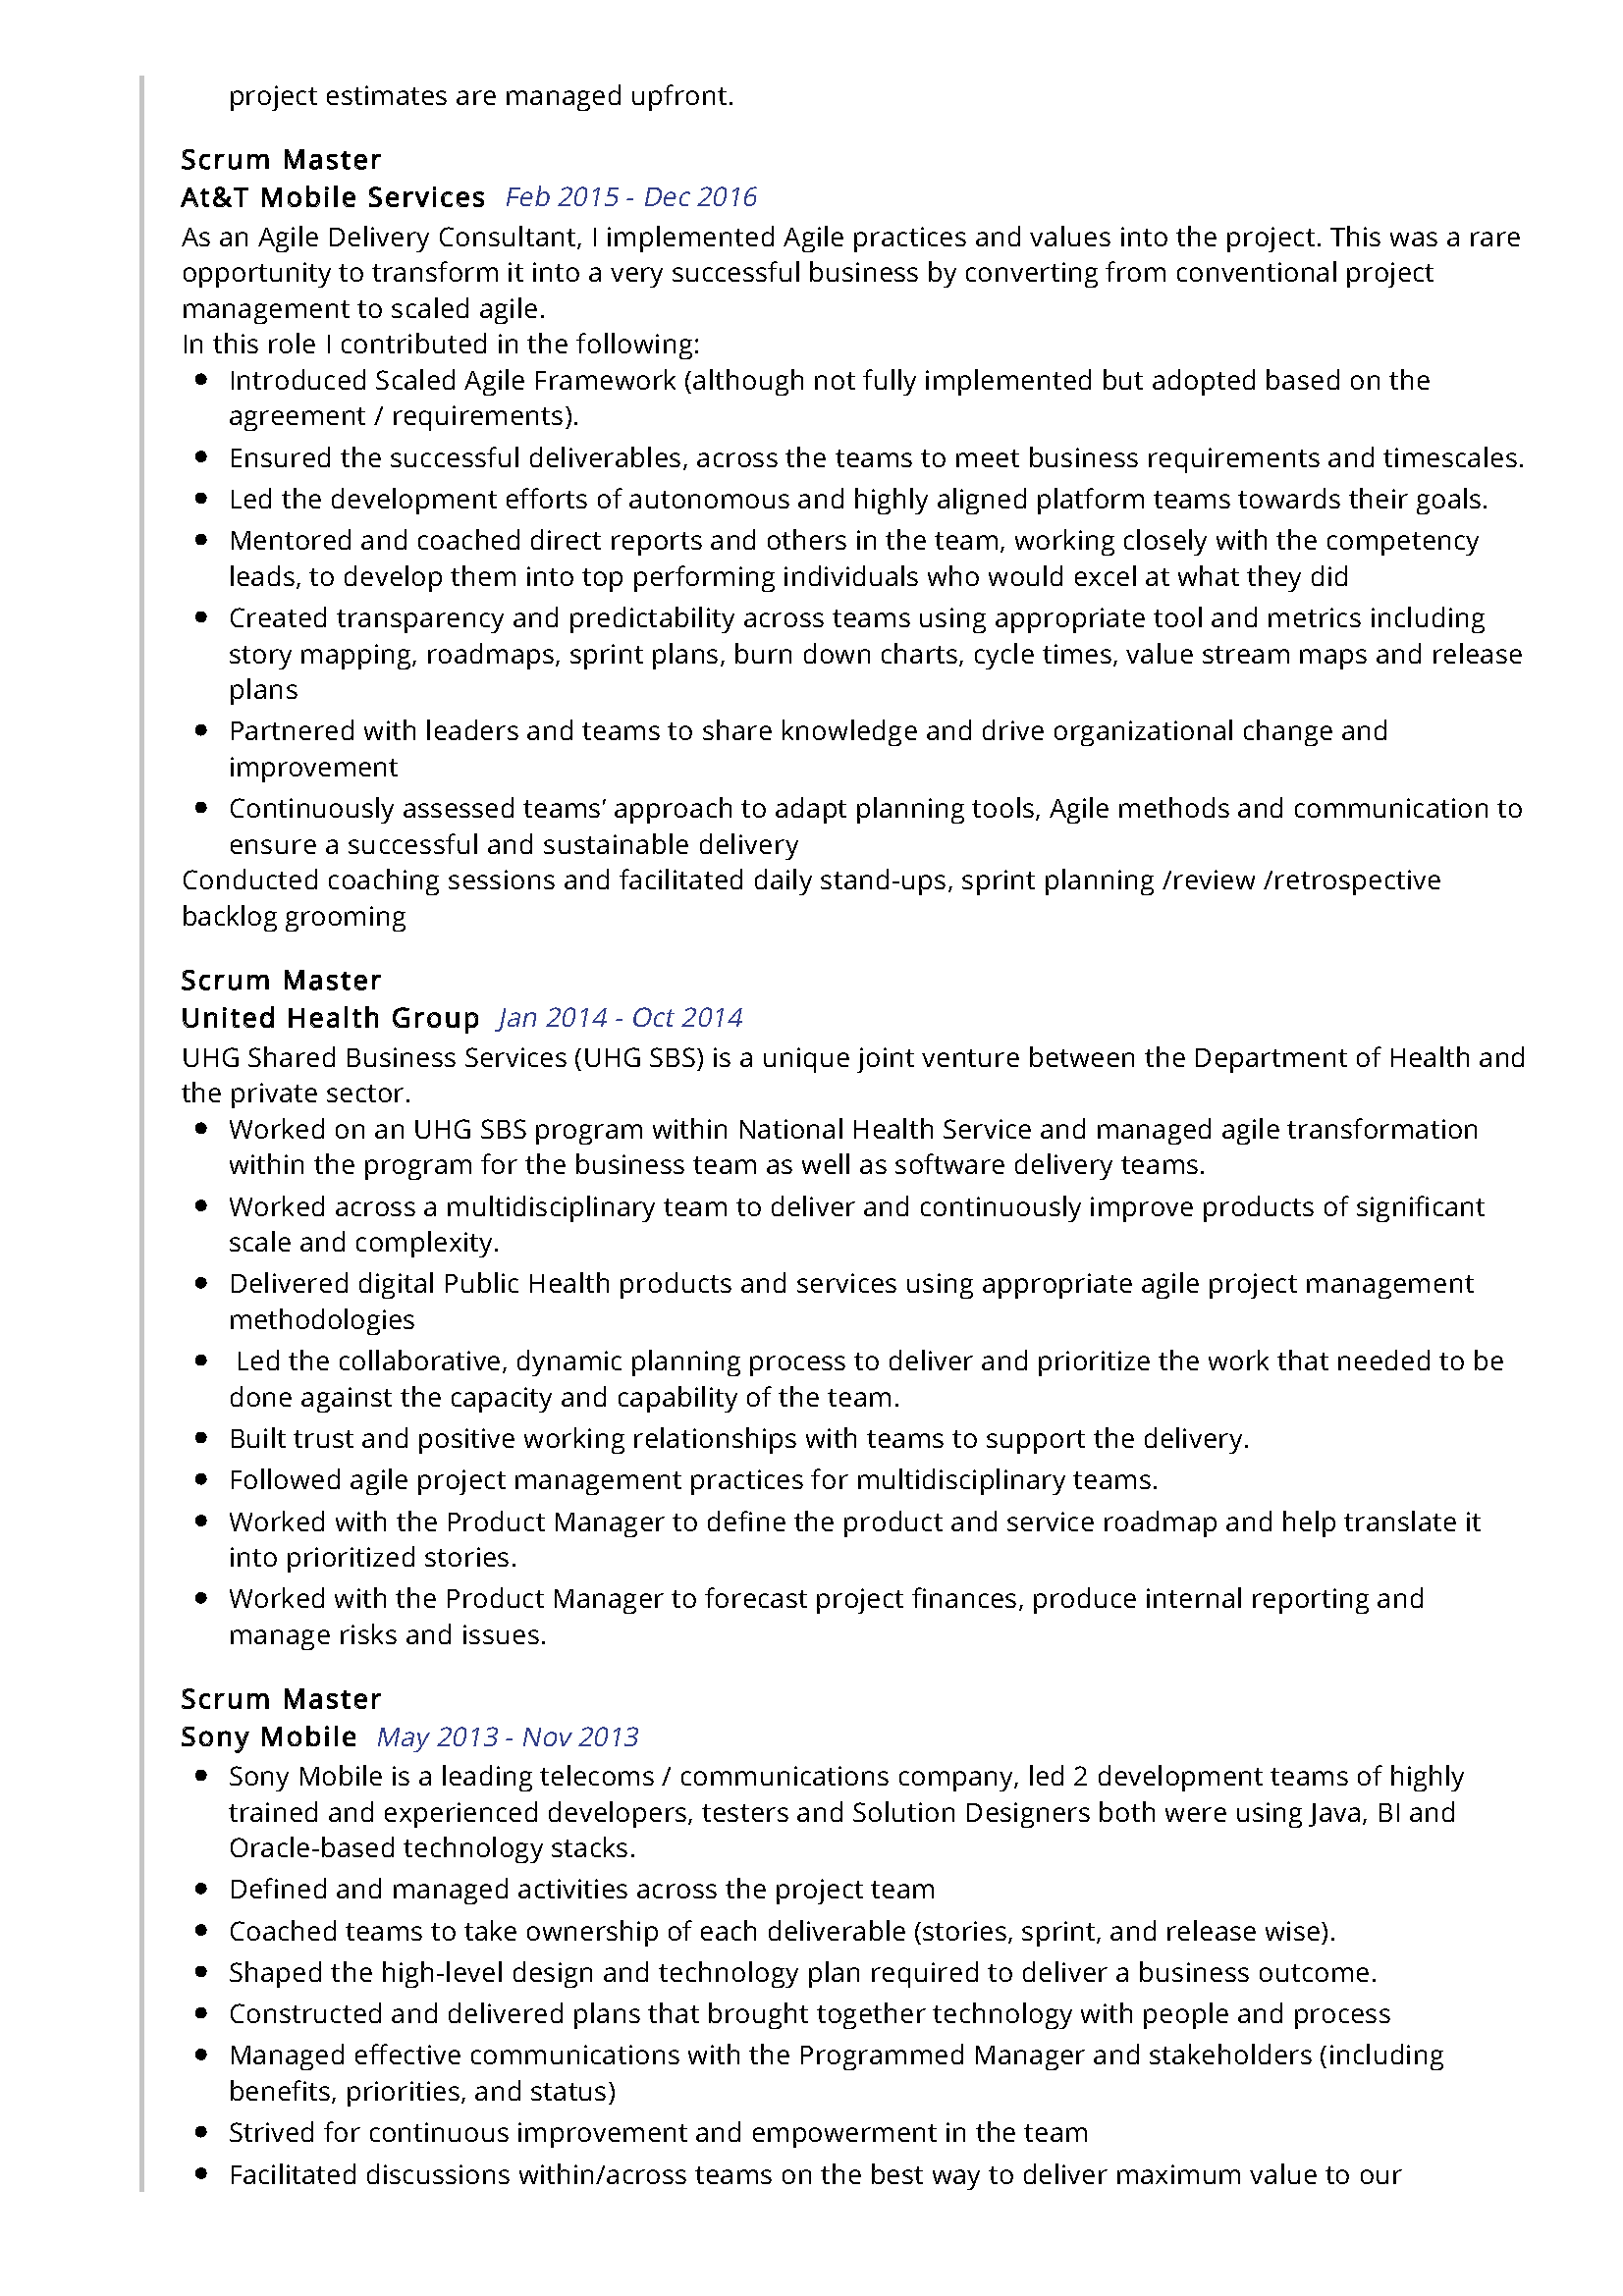 scrum master project manager resume